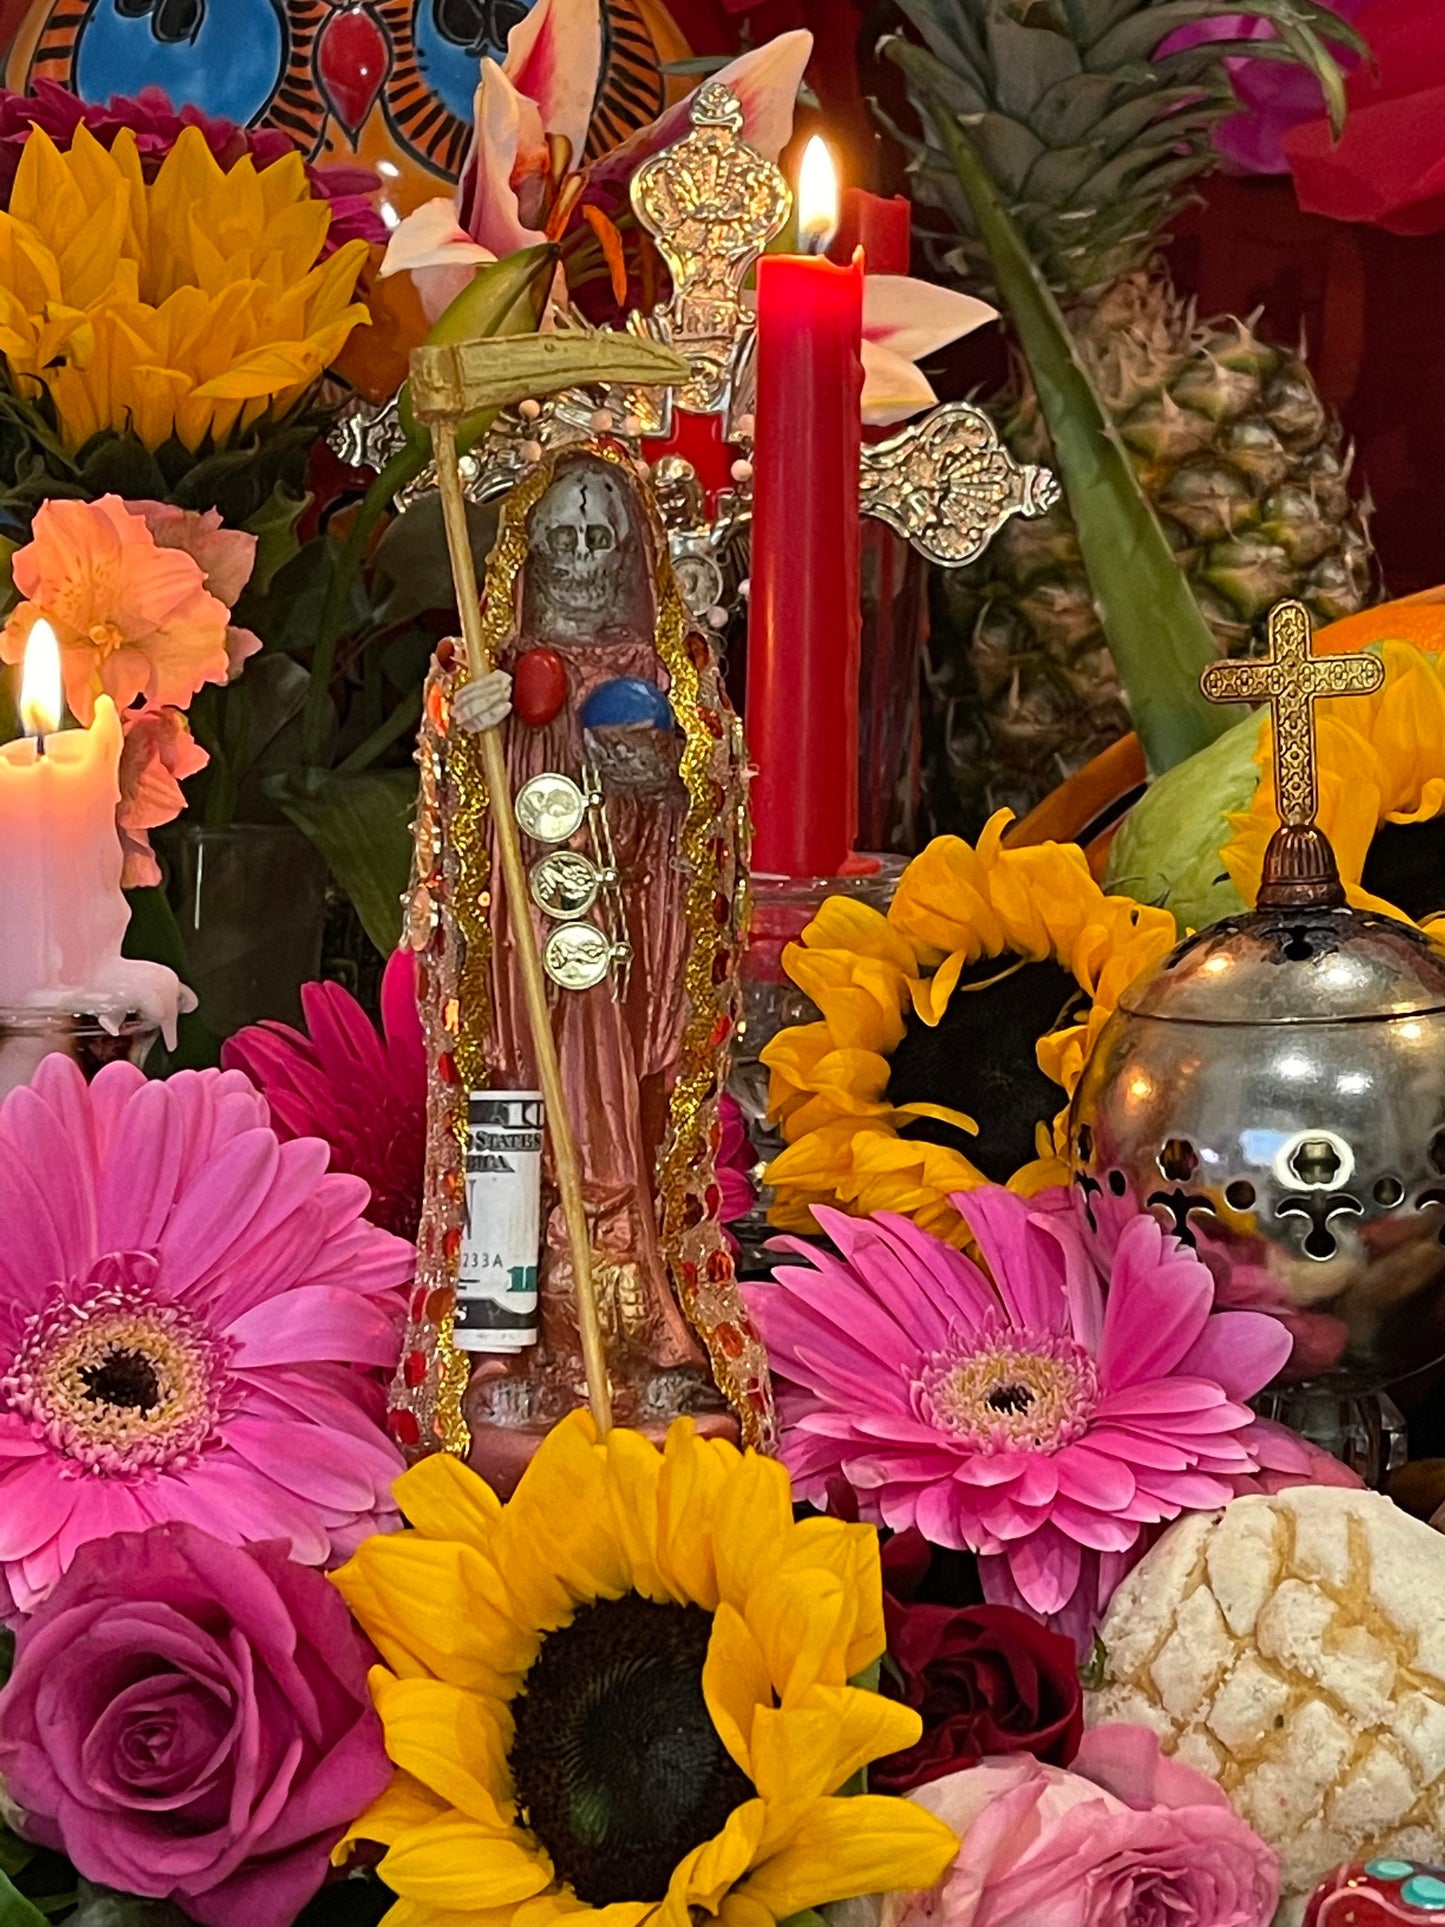 Deluxe Santa Muerte Cobre / Copper Statue + Fast Luck + 24K Gold + Baptized + Fixed + Made in Mexico